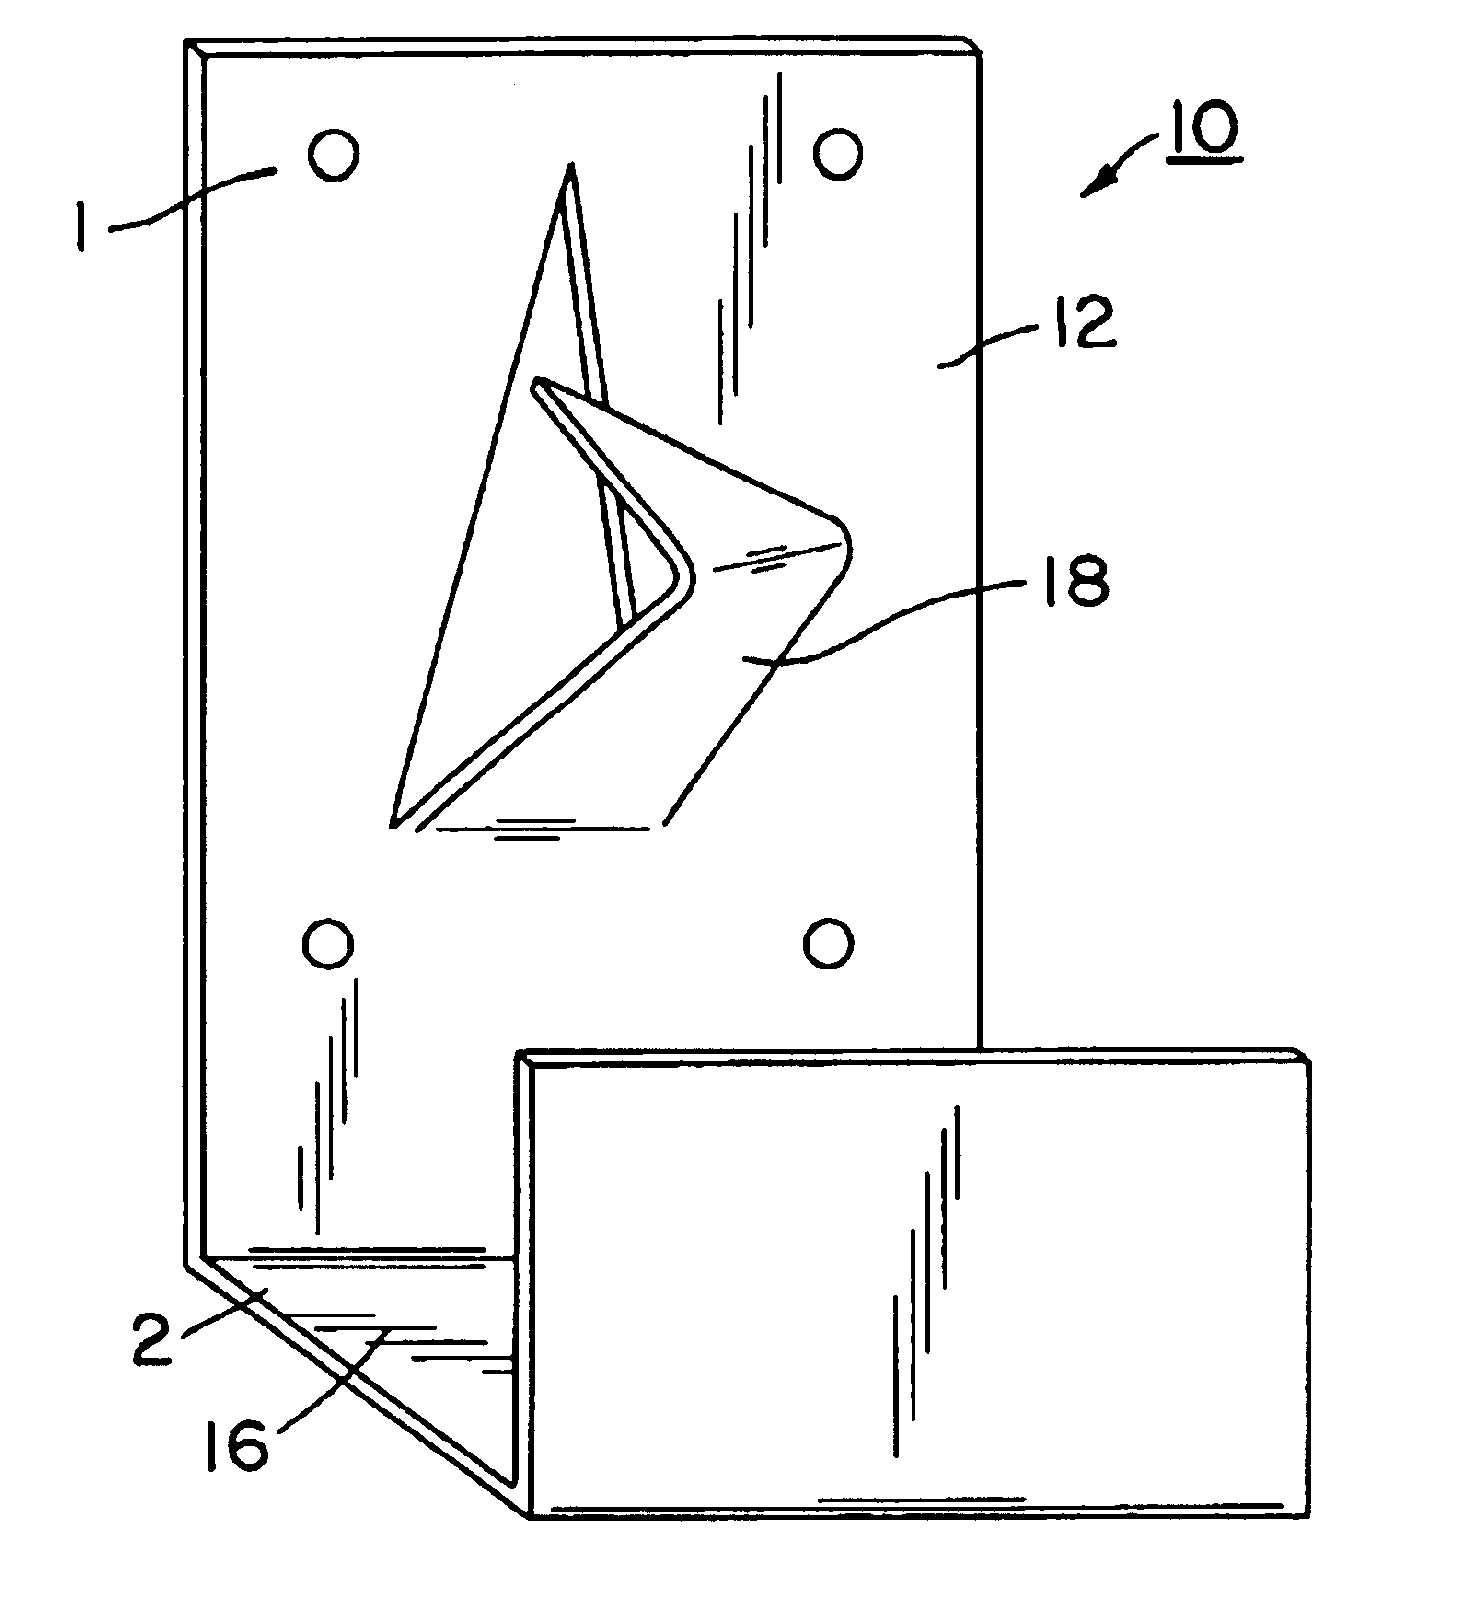 Siding clip for supporting a panel